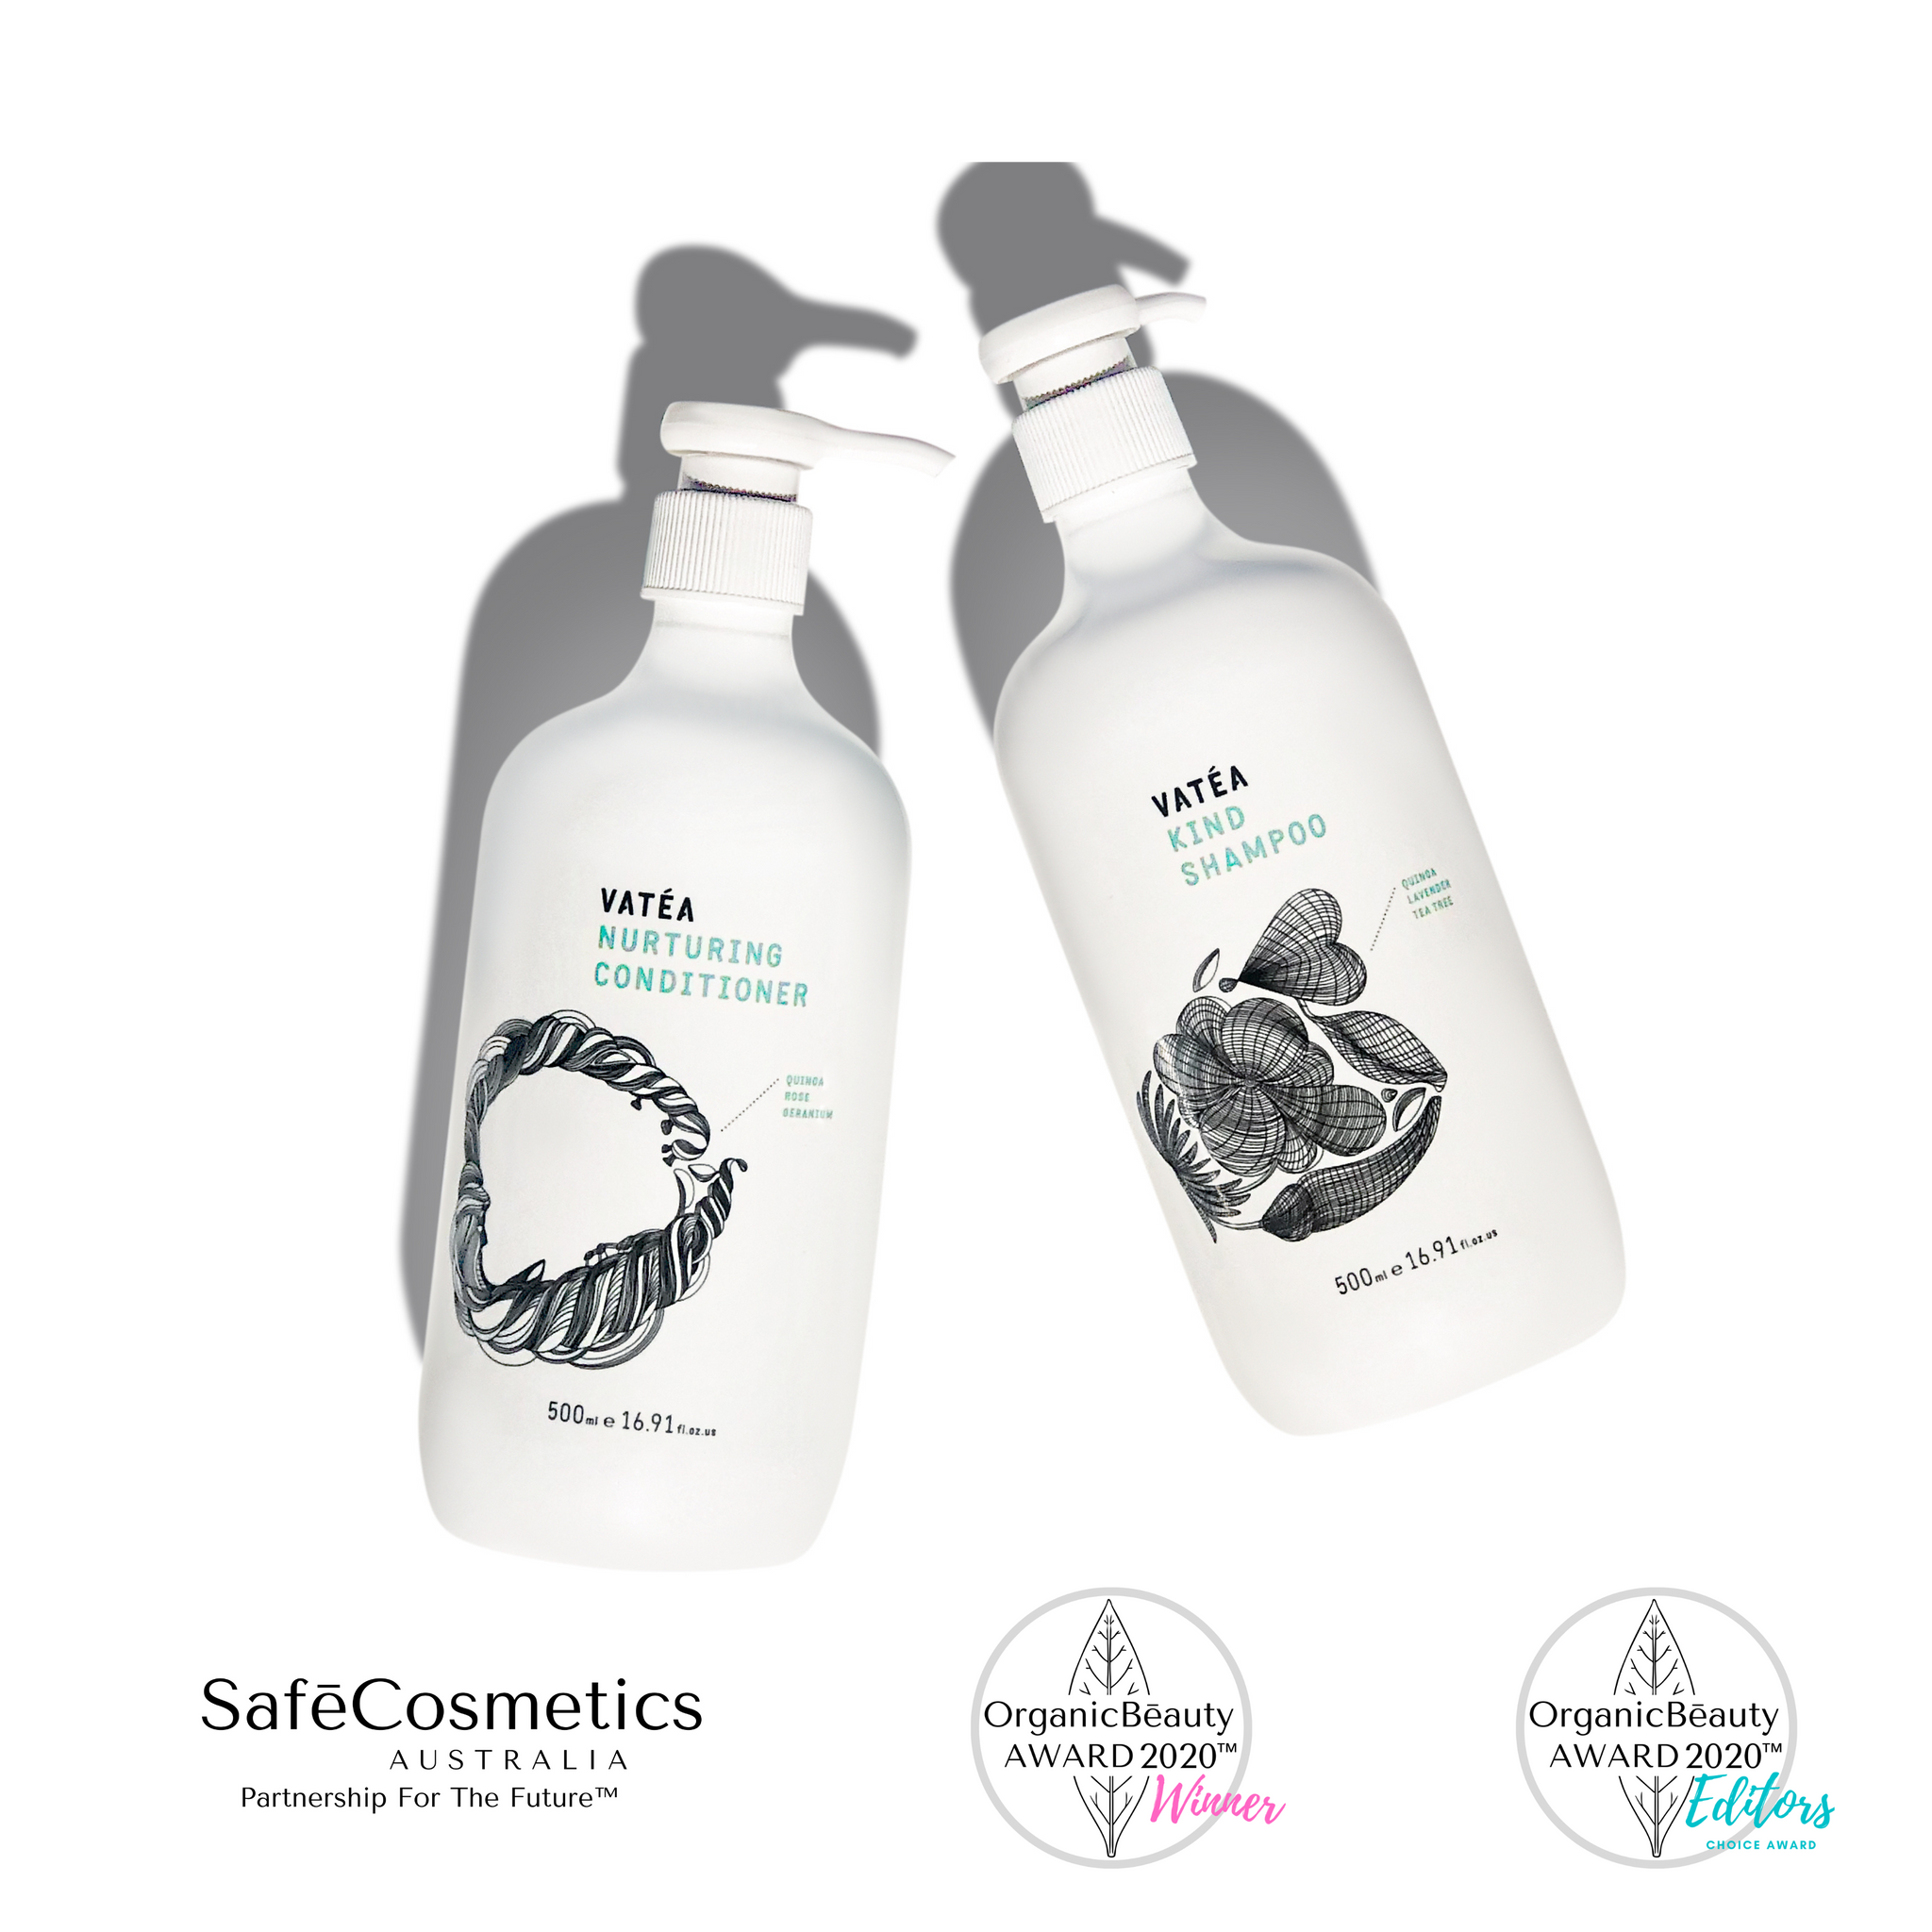 VATÉA Kind Shampoo and Nurturing Conditioner, are a gentle, soothing hair products suitable for all hair types. Infused virgin coconut oil and quinoa to soften and brighten your hair. Buy our duo to save. 